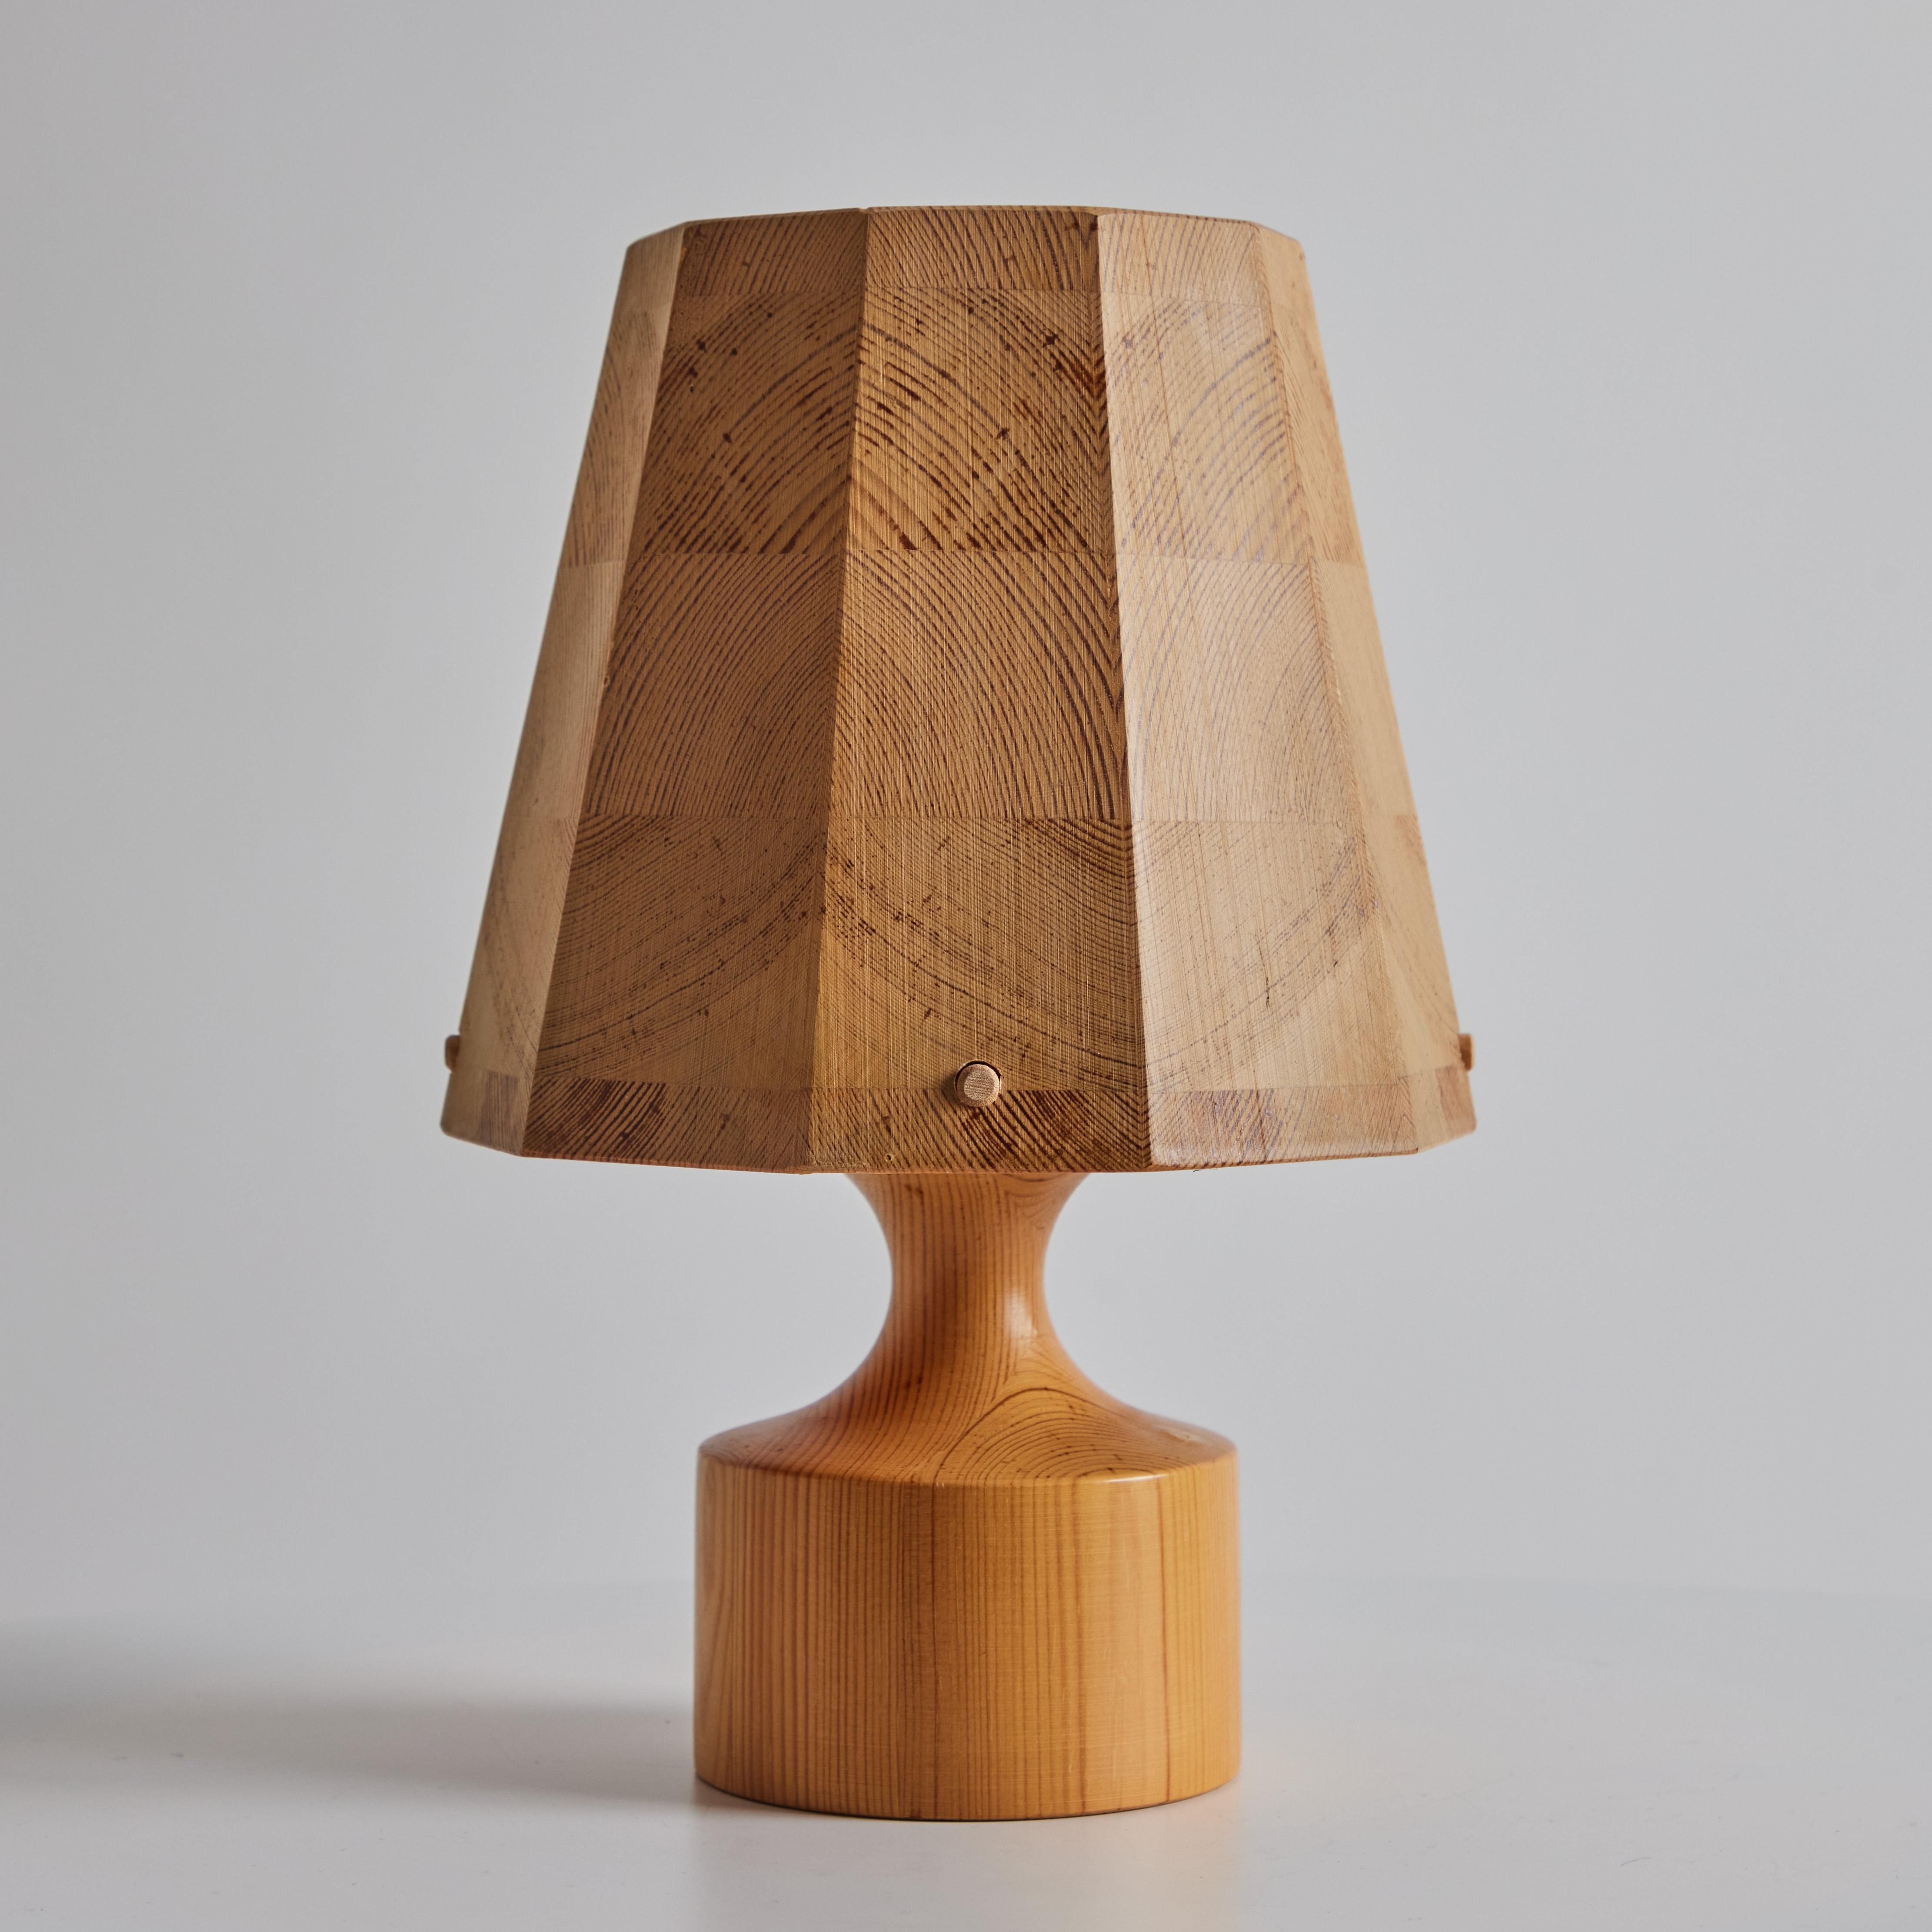 Pair of 1960s Wood Table Lamps Attributed to Hans-Agne Jakobsson for AB Ellysett For Sale 10